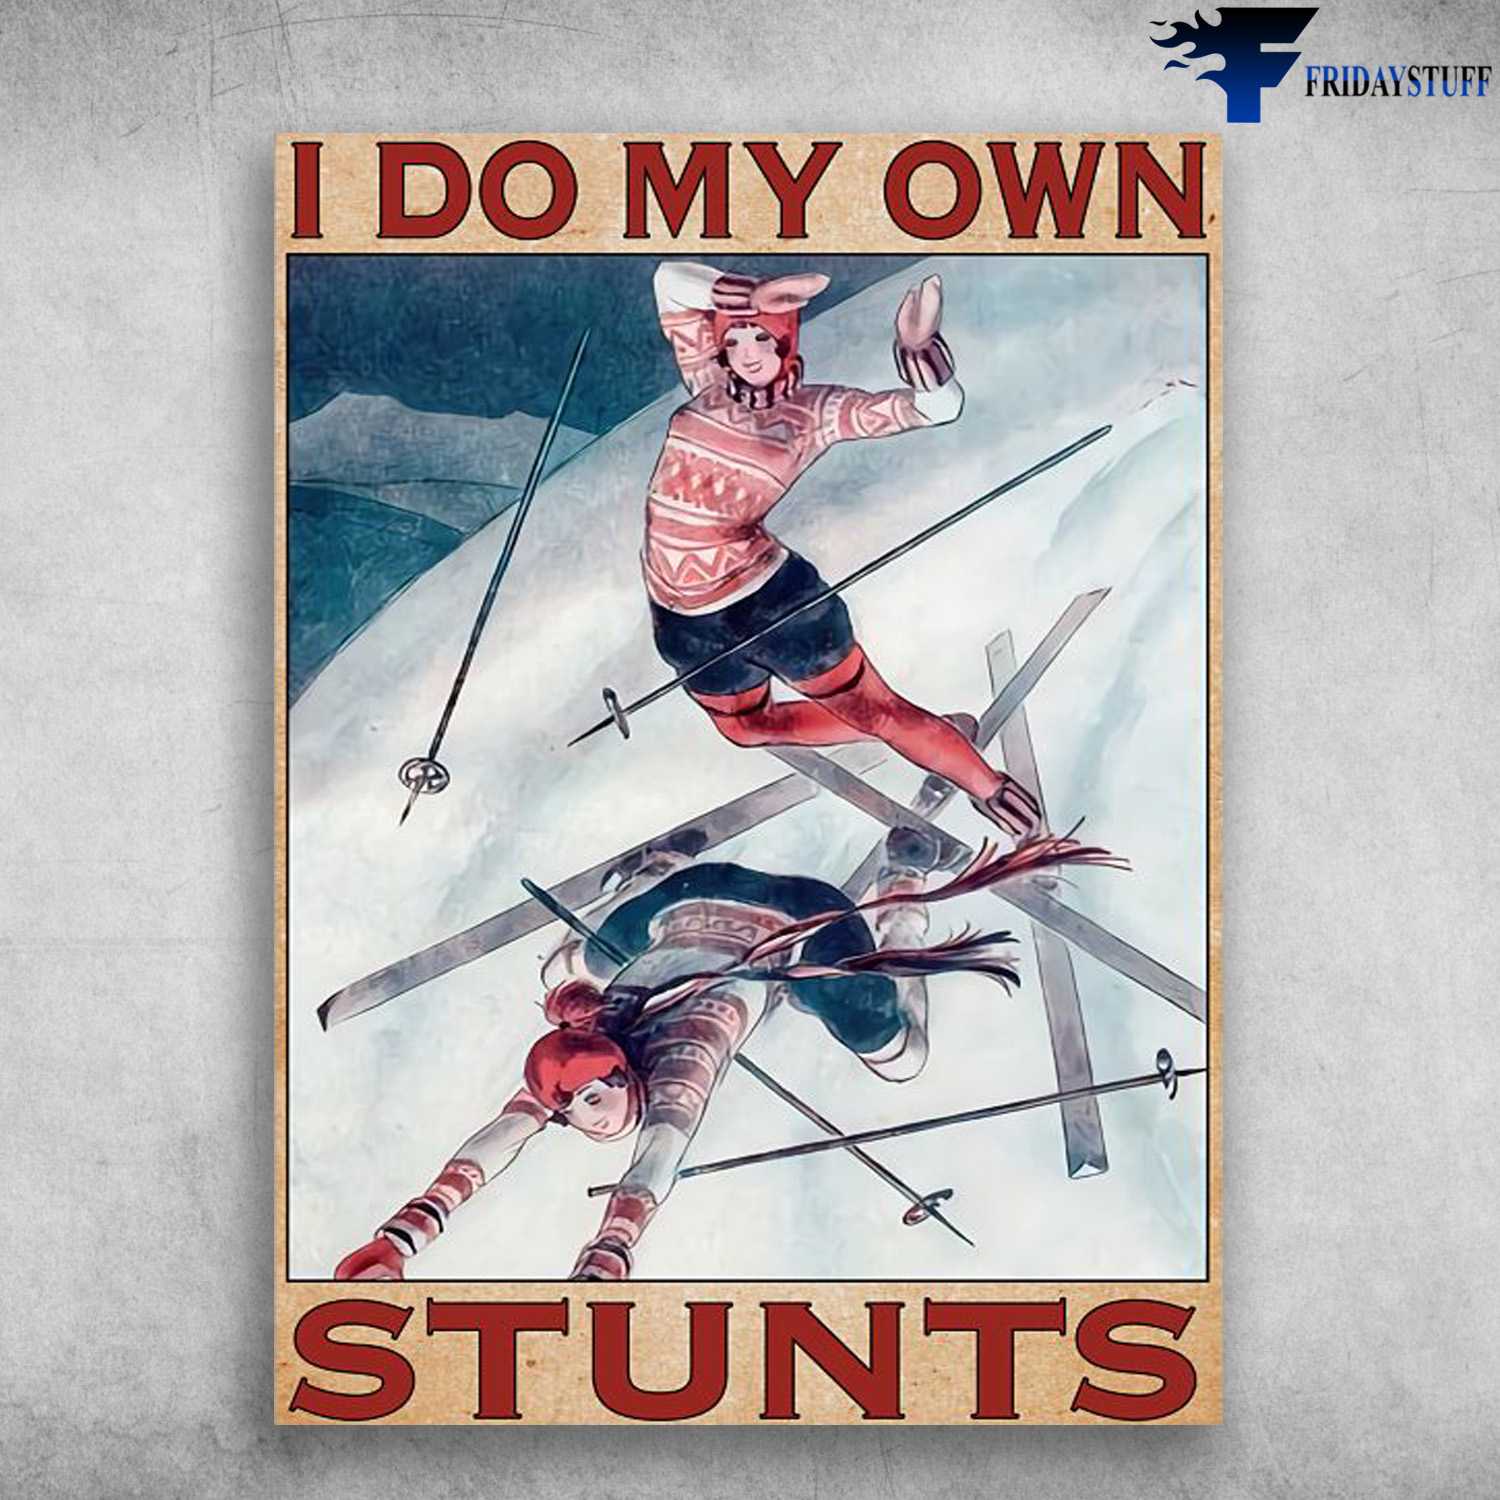 Skiing Couple, Skiing Poster, I Do My Own Stunts